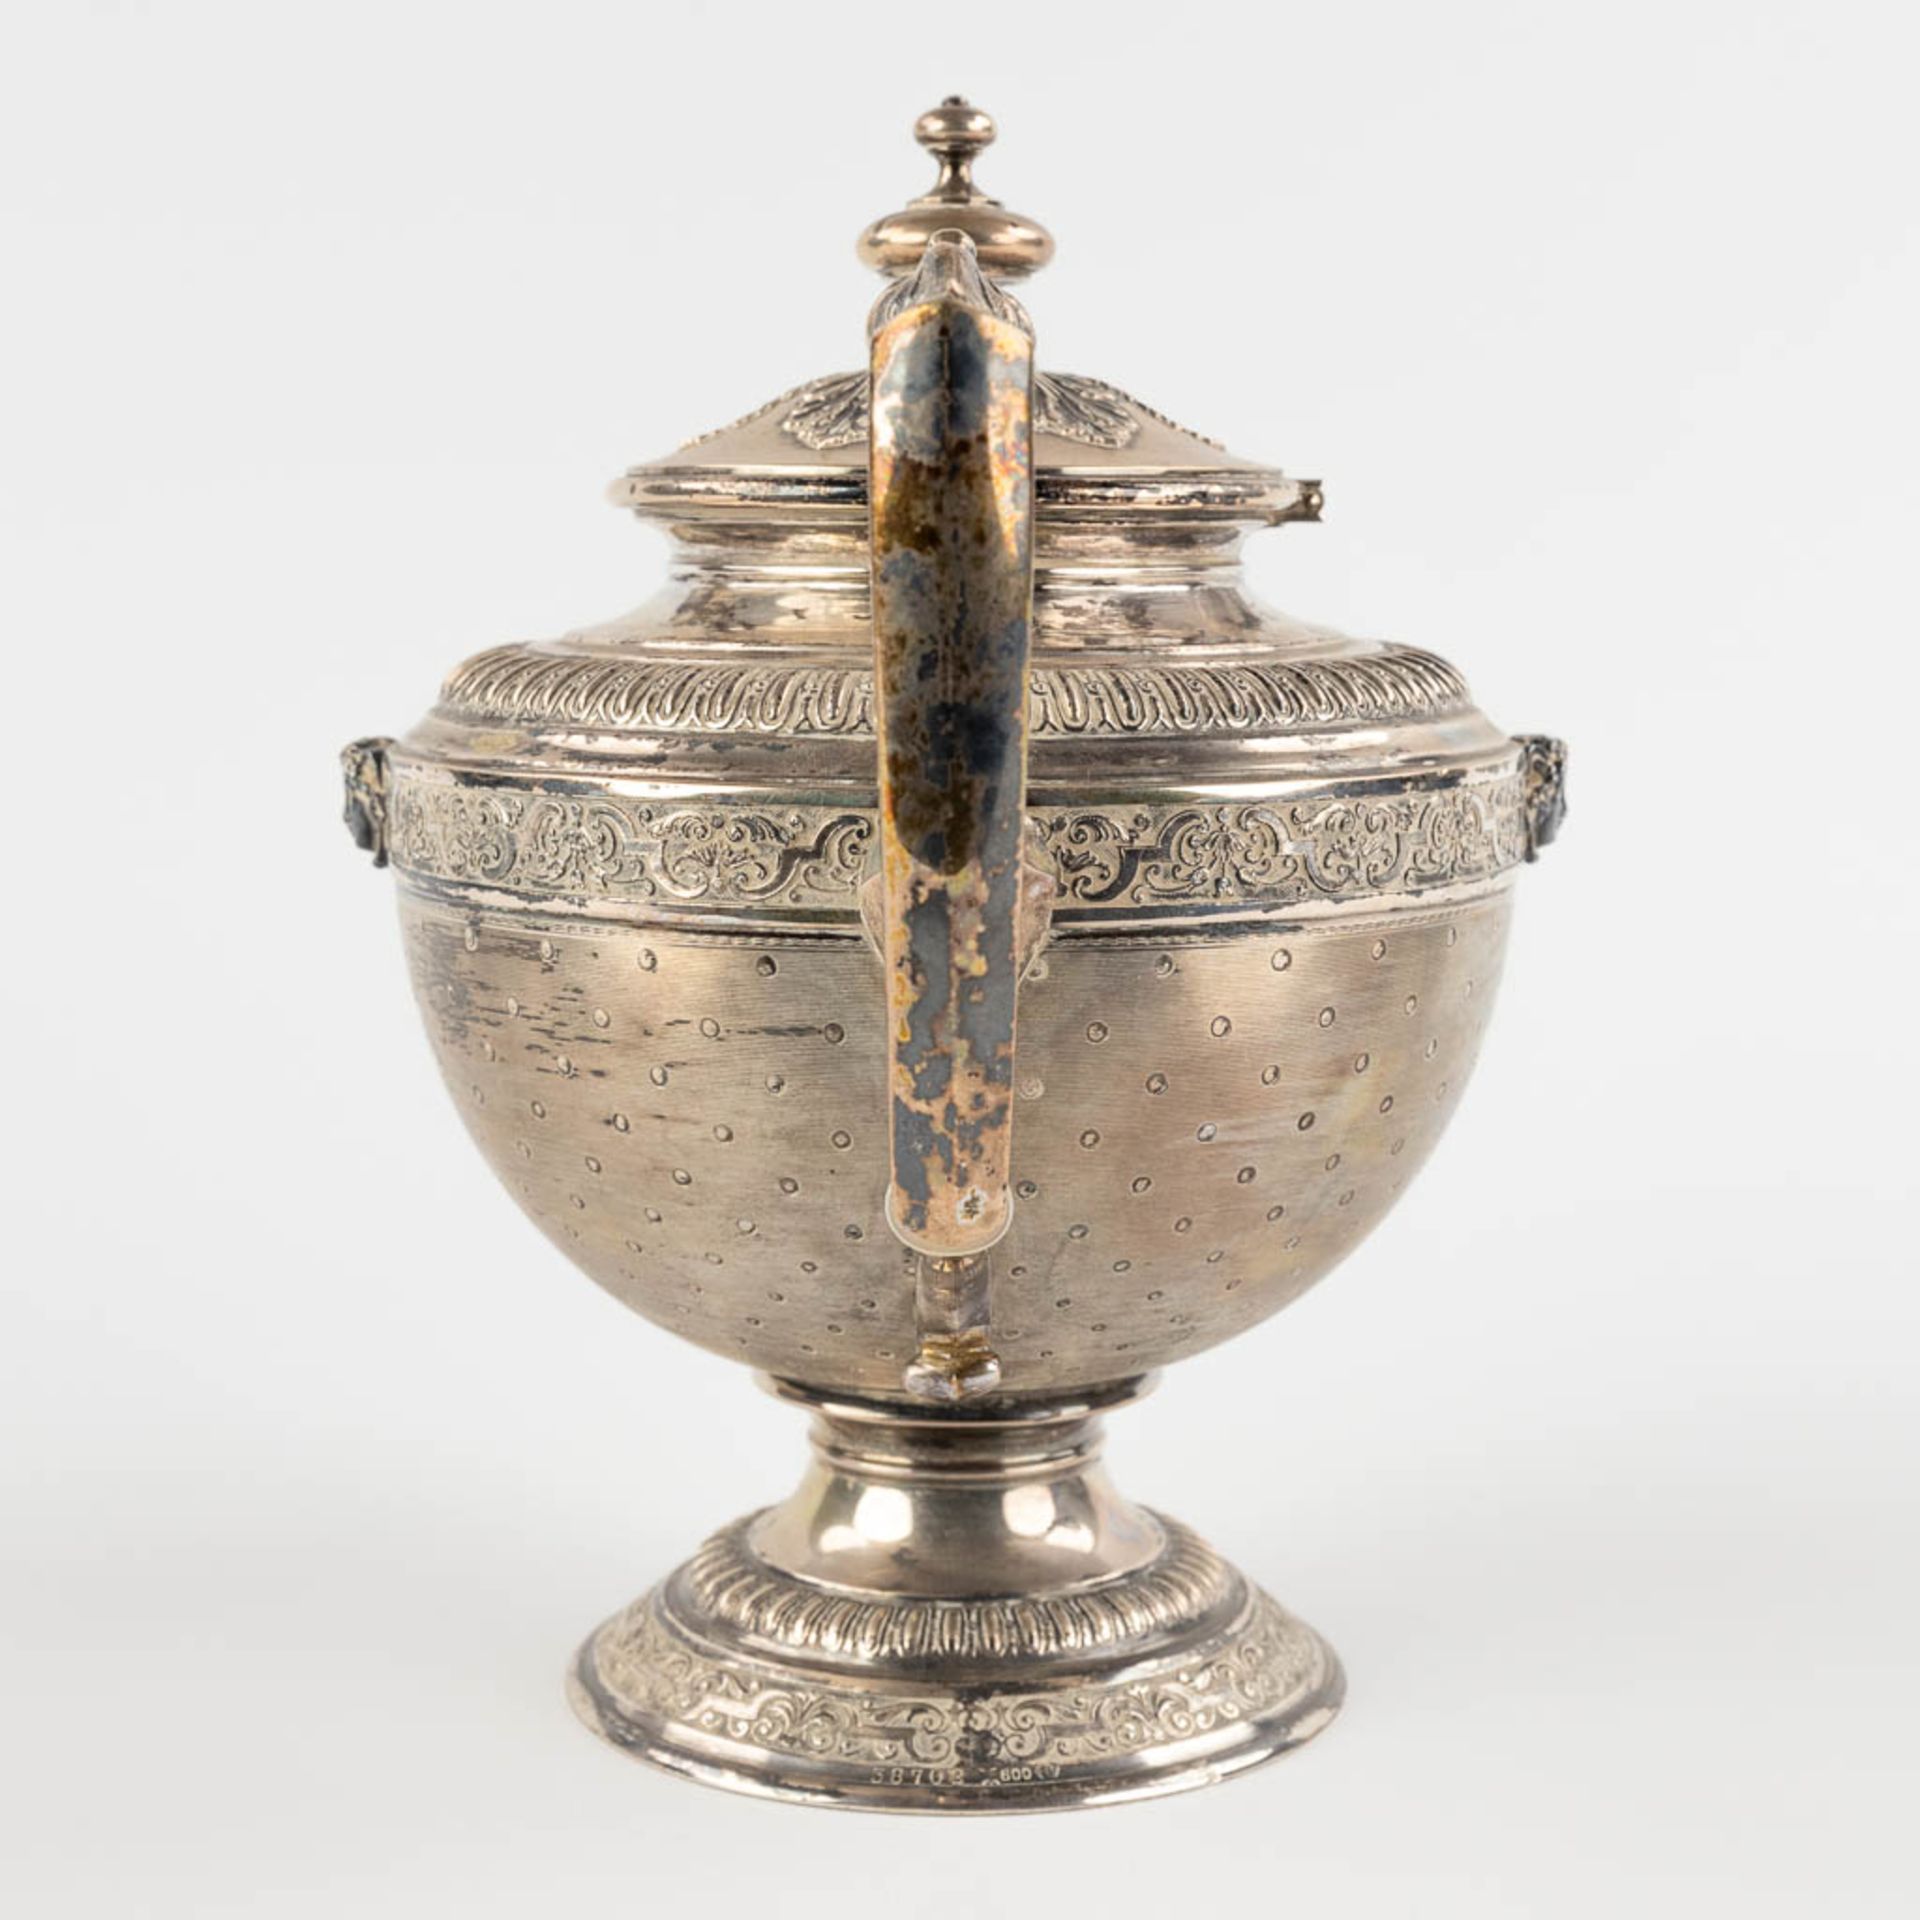 A teapot, silver, Germany. Gross: 659g. (D:16 x W:26 x H:21 cm) - Image 4 of 12